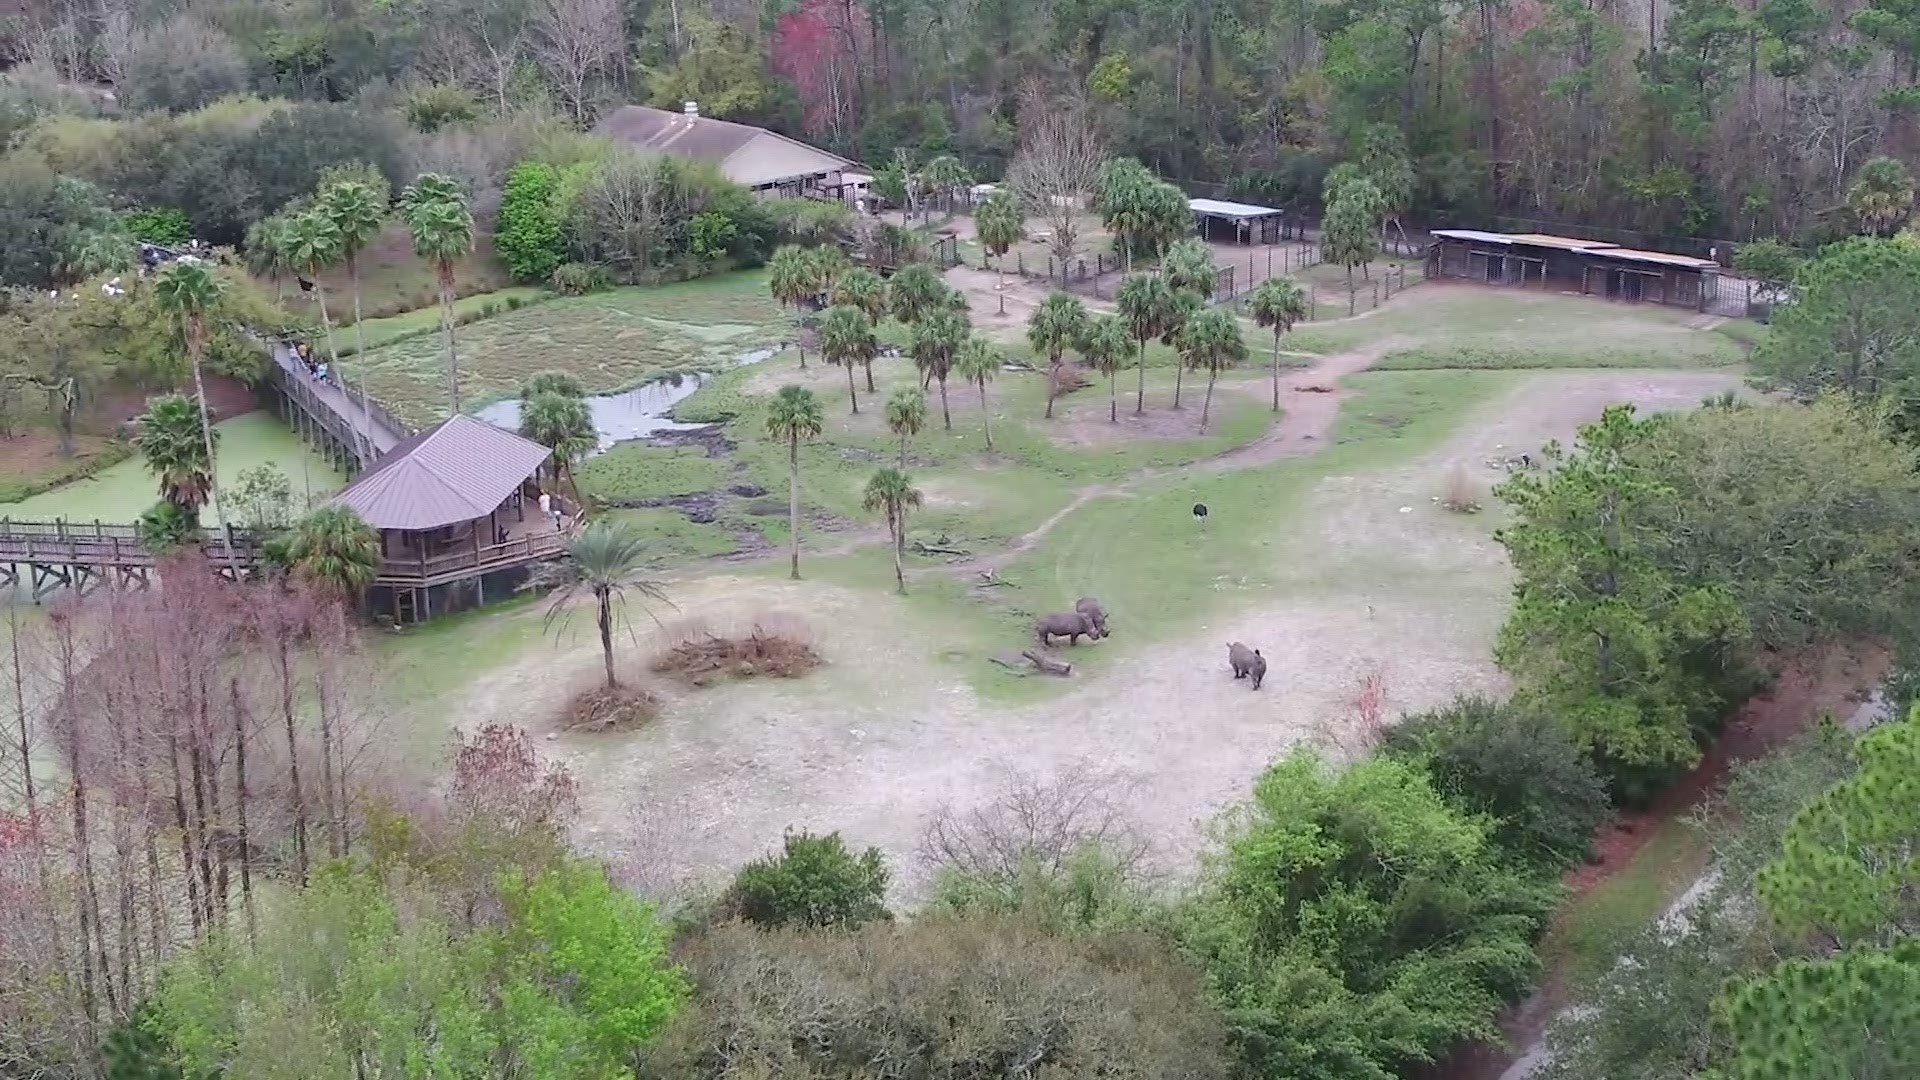 On Tuesday, a female zookeeper was struck by a rhino during routine training at the Jacksonville Zoo and Gardens. This is aerial footage of the rhino exhibit.